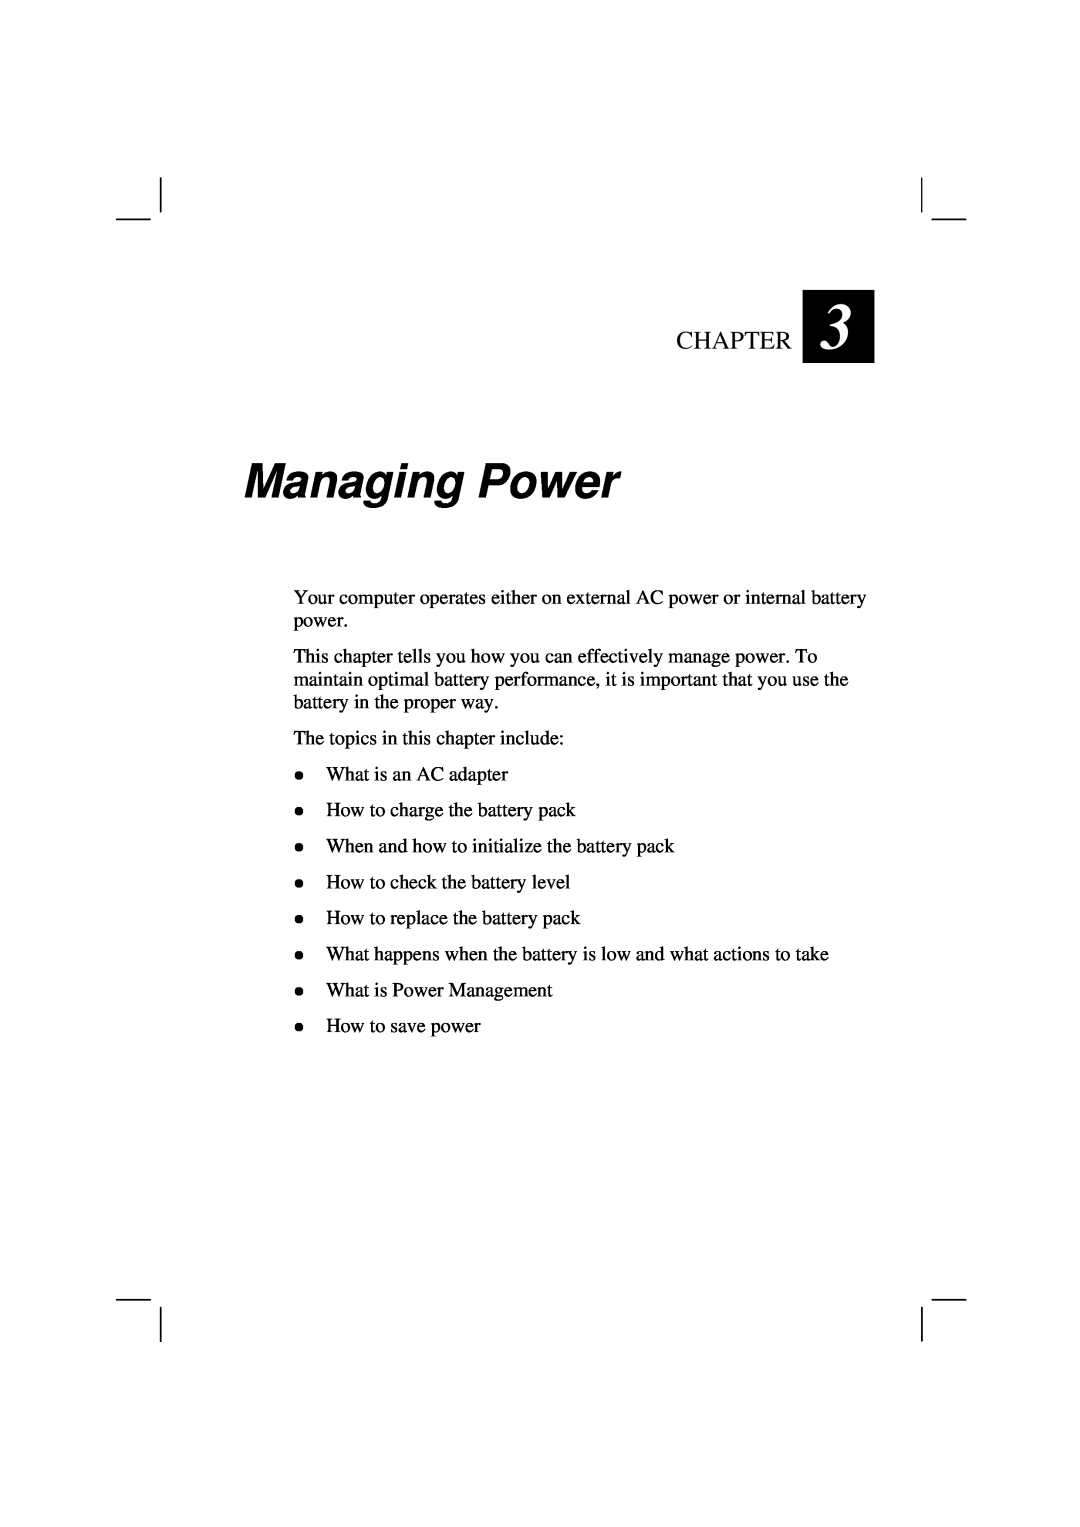 Casio HK1223 owner manual Managing Power, Chapter 